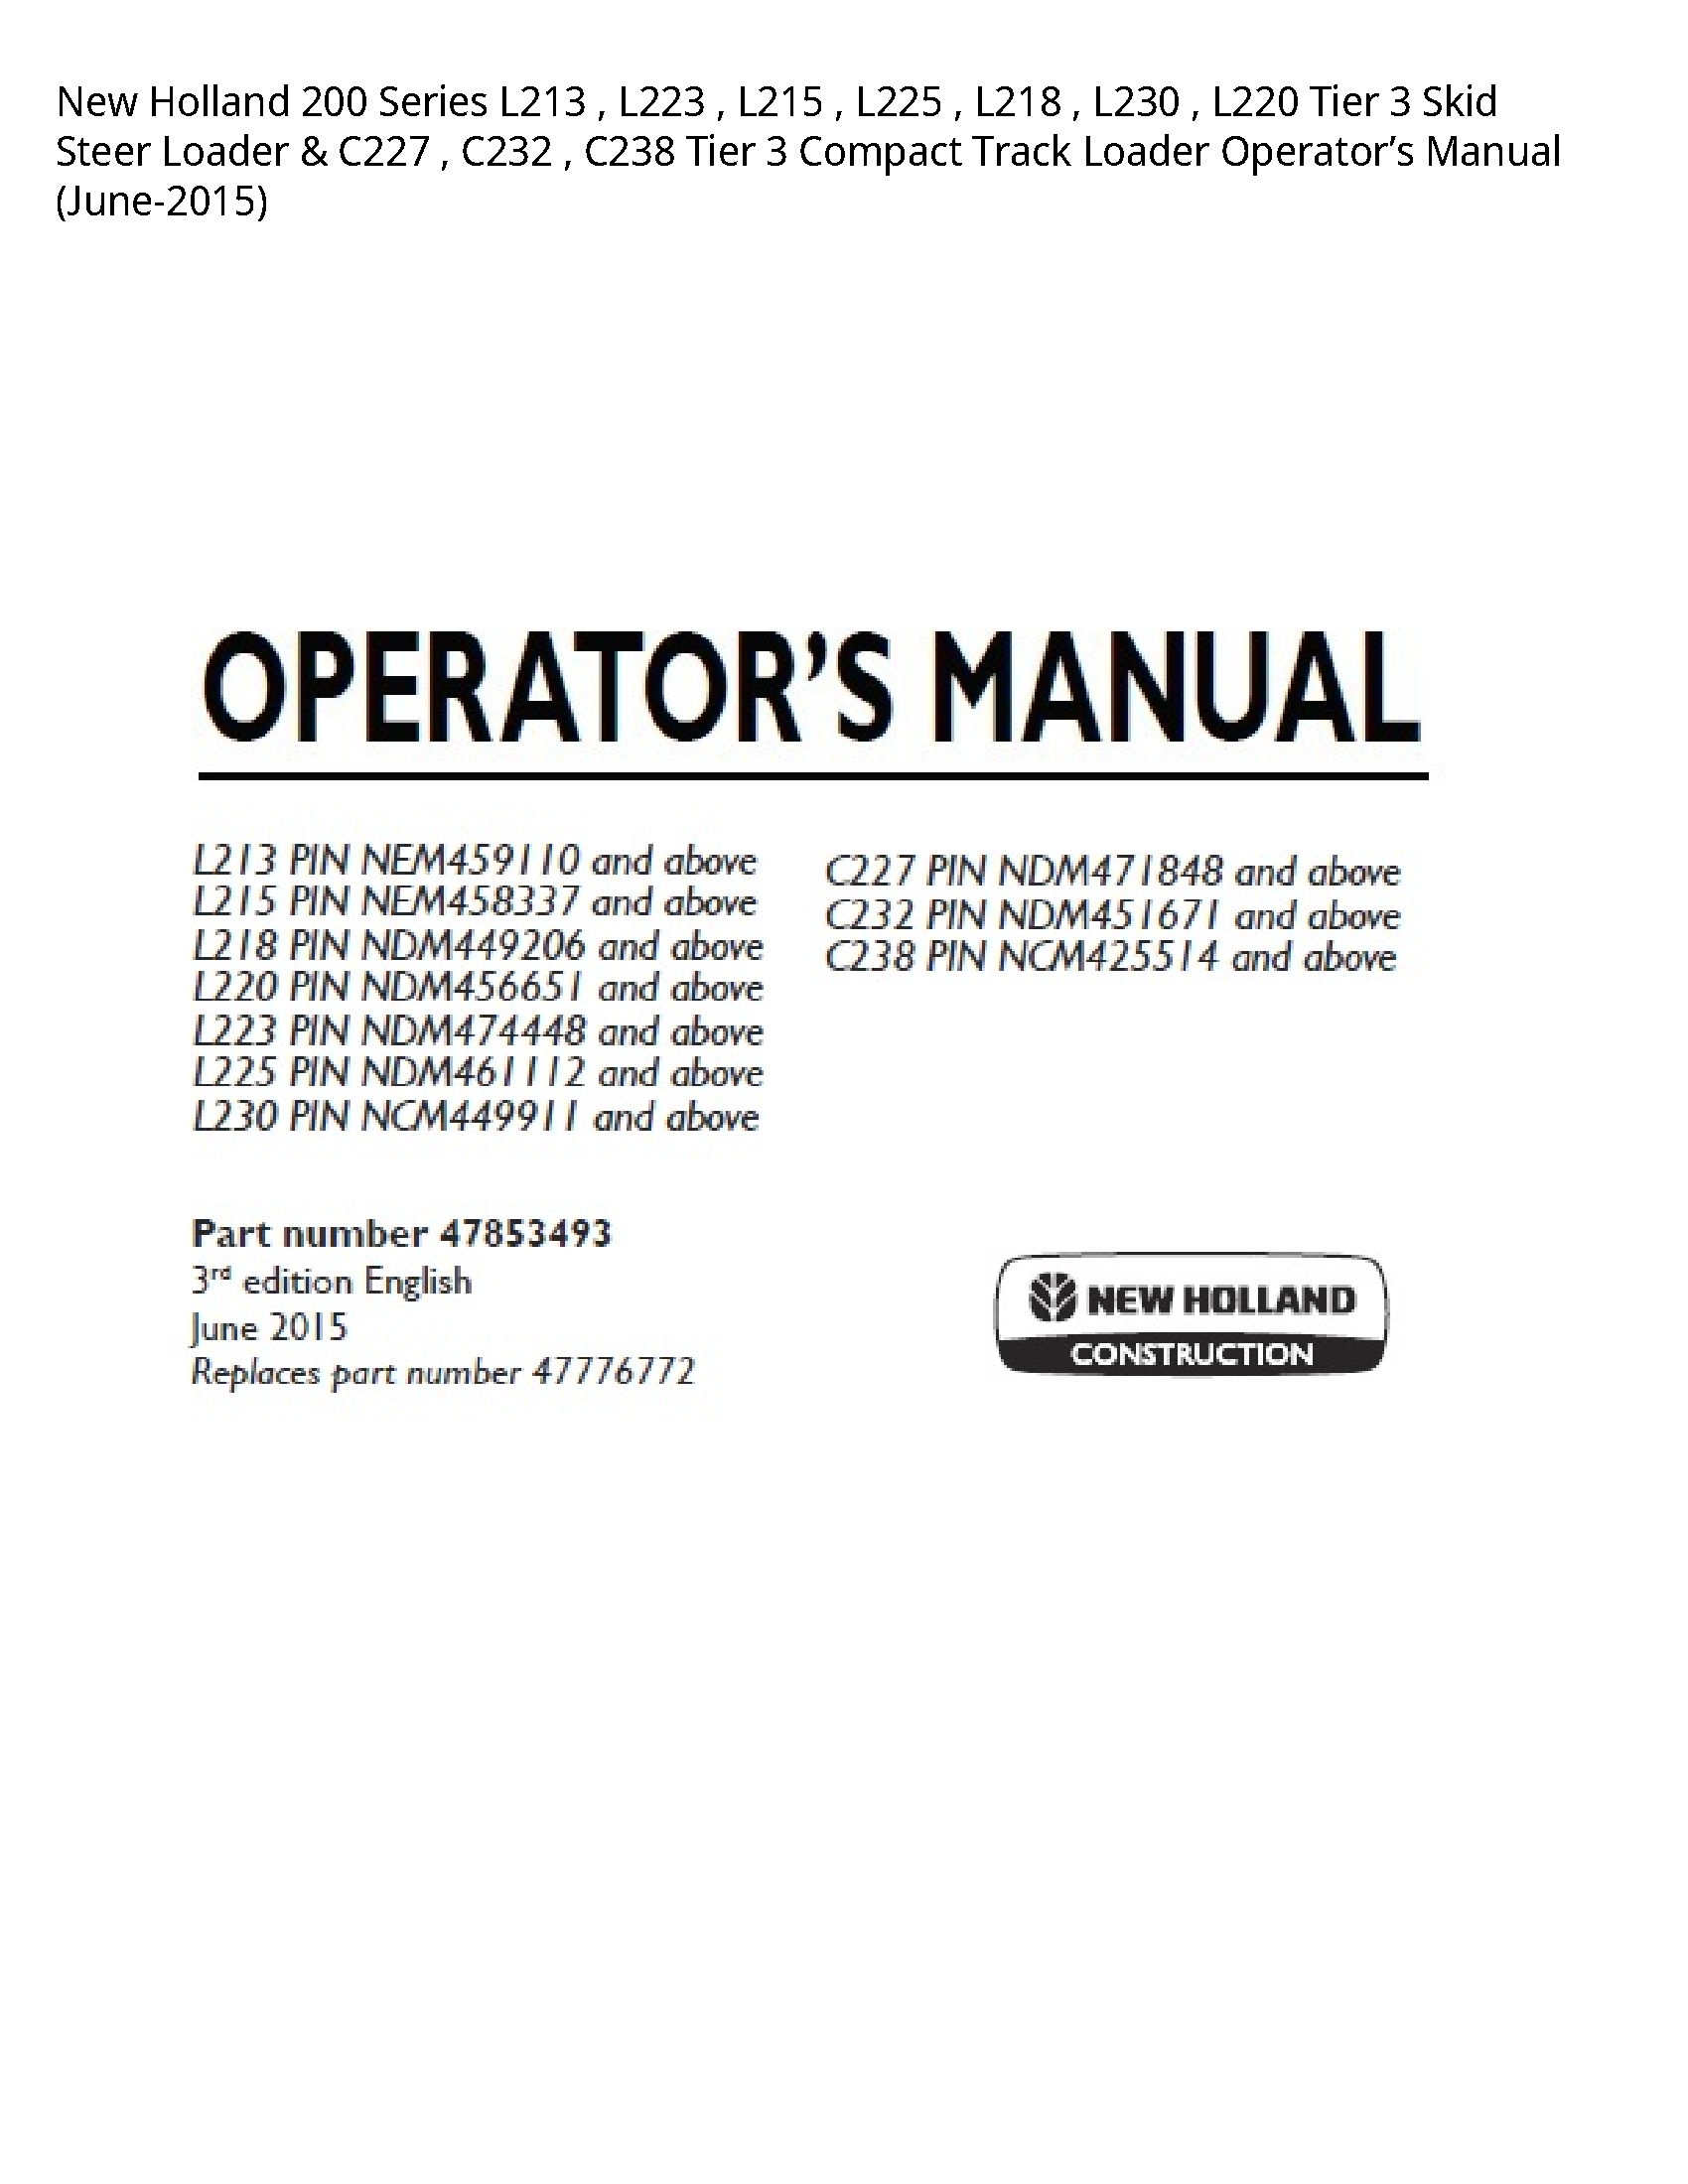 New Holland 200 Series Tier Skid Steer Loader Tier Compact Track Loader Operator’s manual